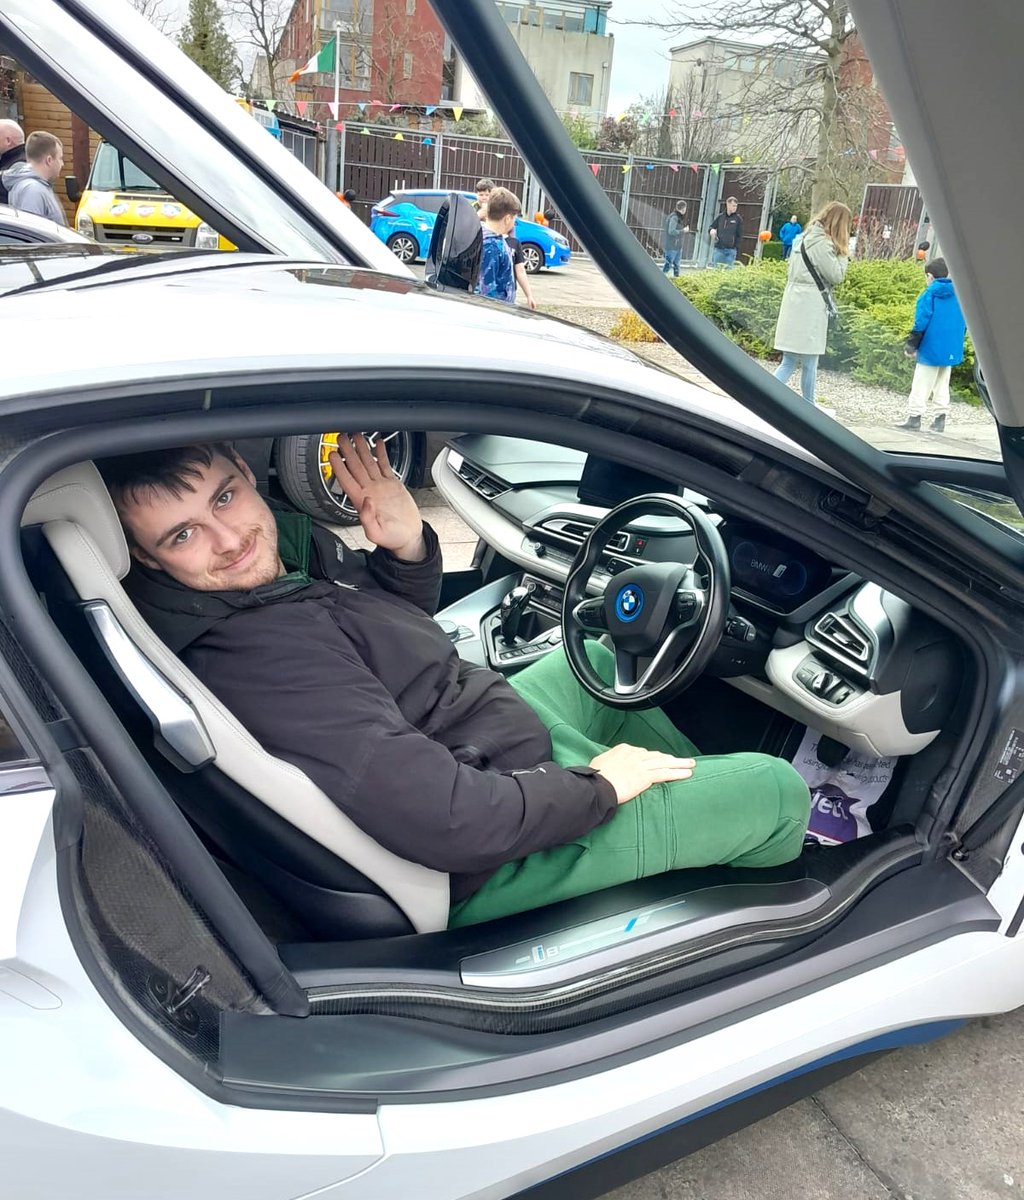 NLN Tallaght students drove home the message of road safety and celebrated community, as they attended the fantastic Cherry Blossoms Community Festival in Cherry Orchard, Dublin, last week.
#ThinkPossible #Community #RoadSafety #SupportedTraining #SupportedEducation